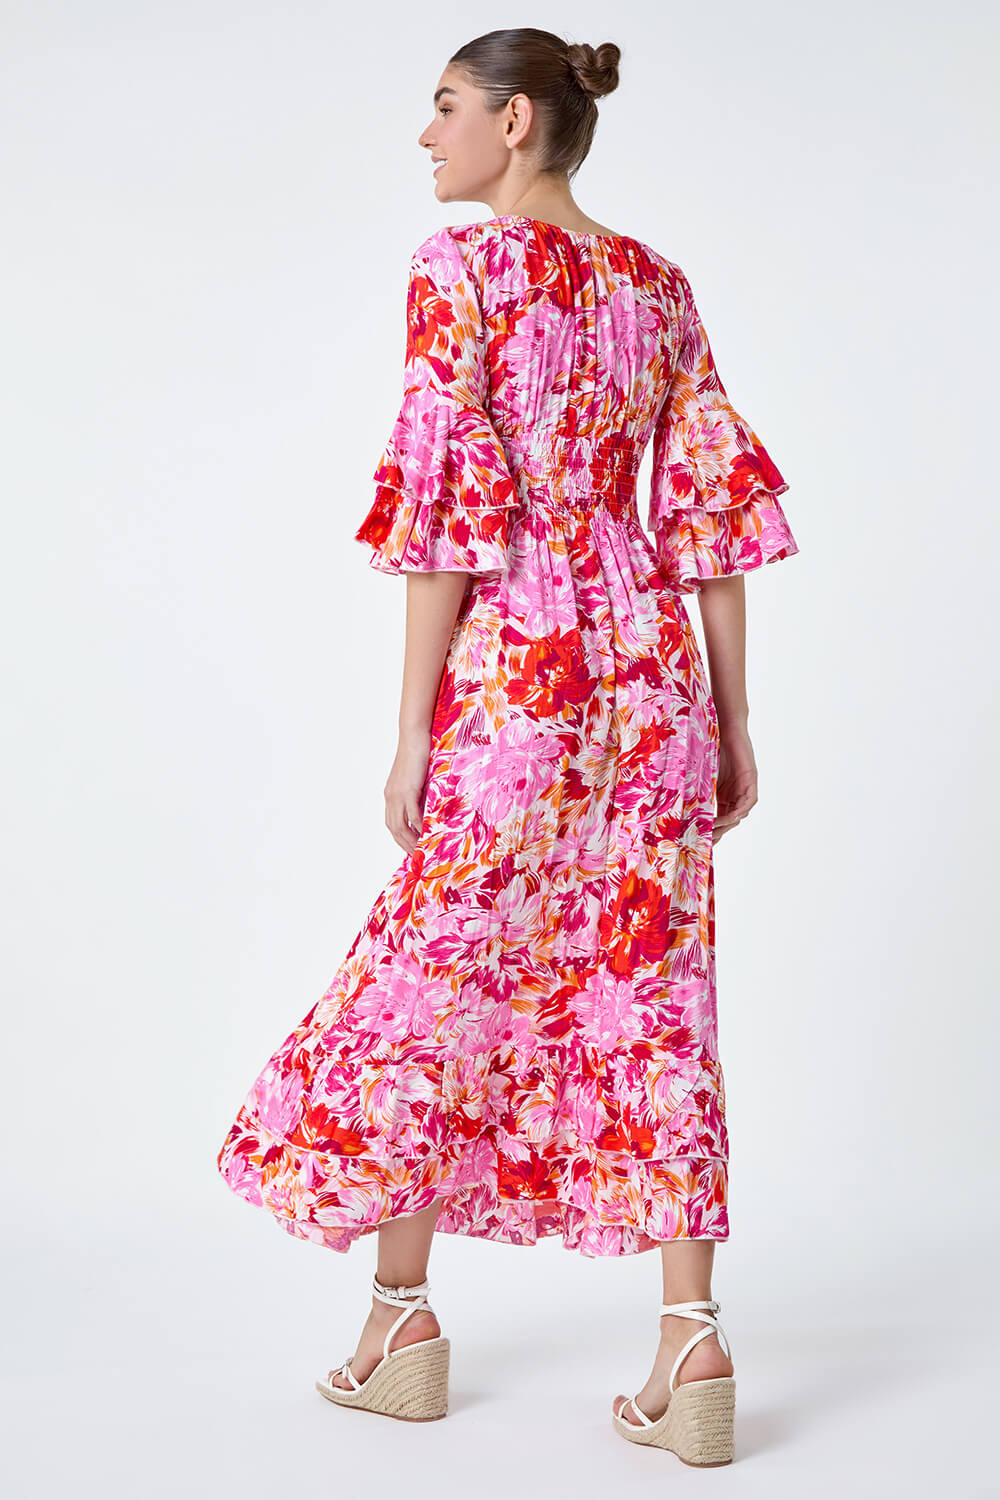 PINK Floral Ruffle Detail Shirred Maxi Dress, Image 3 of 5